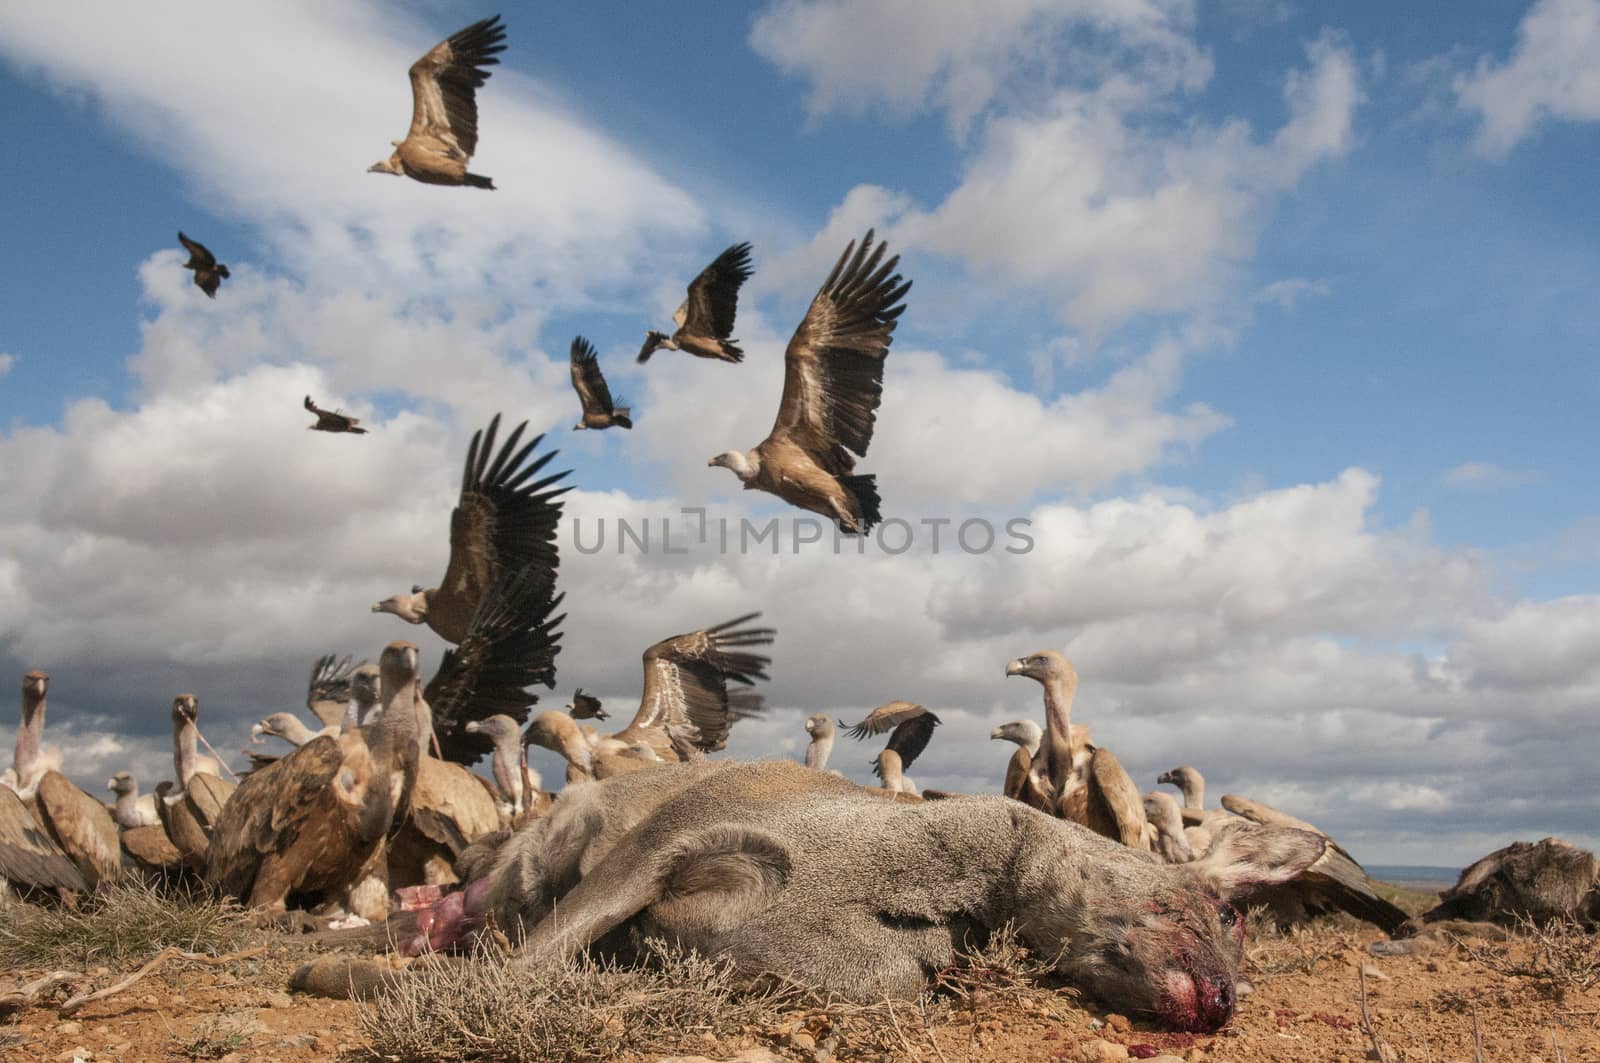 Griffon Vulture, Gyps fulvus, large birds of prey in flight and going down to eat a roe deer, Capreolus capreolus